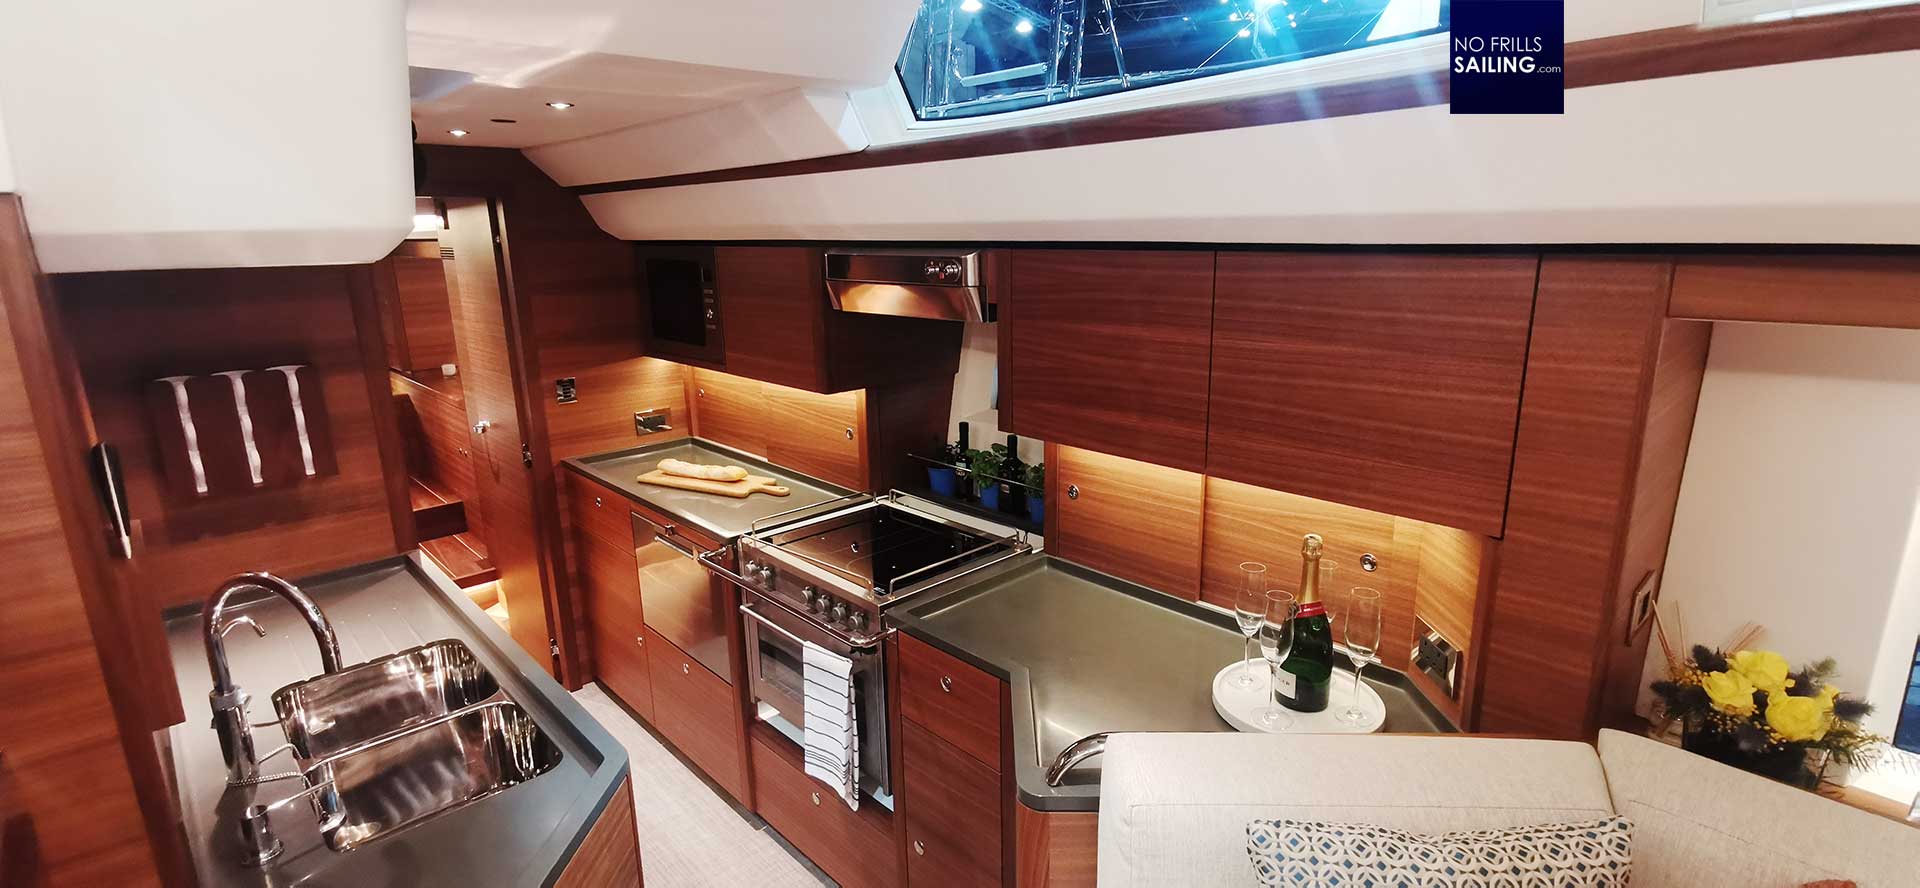 are oyster yachts worth the money